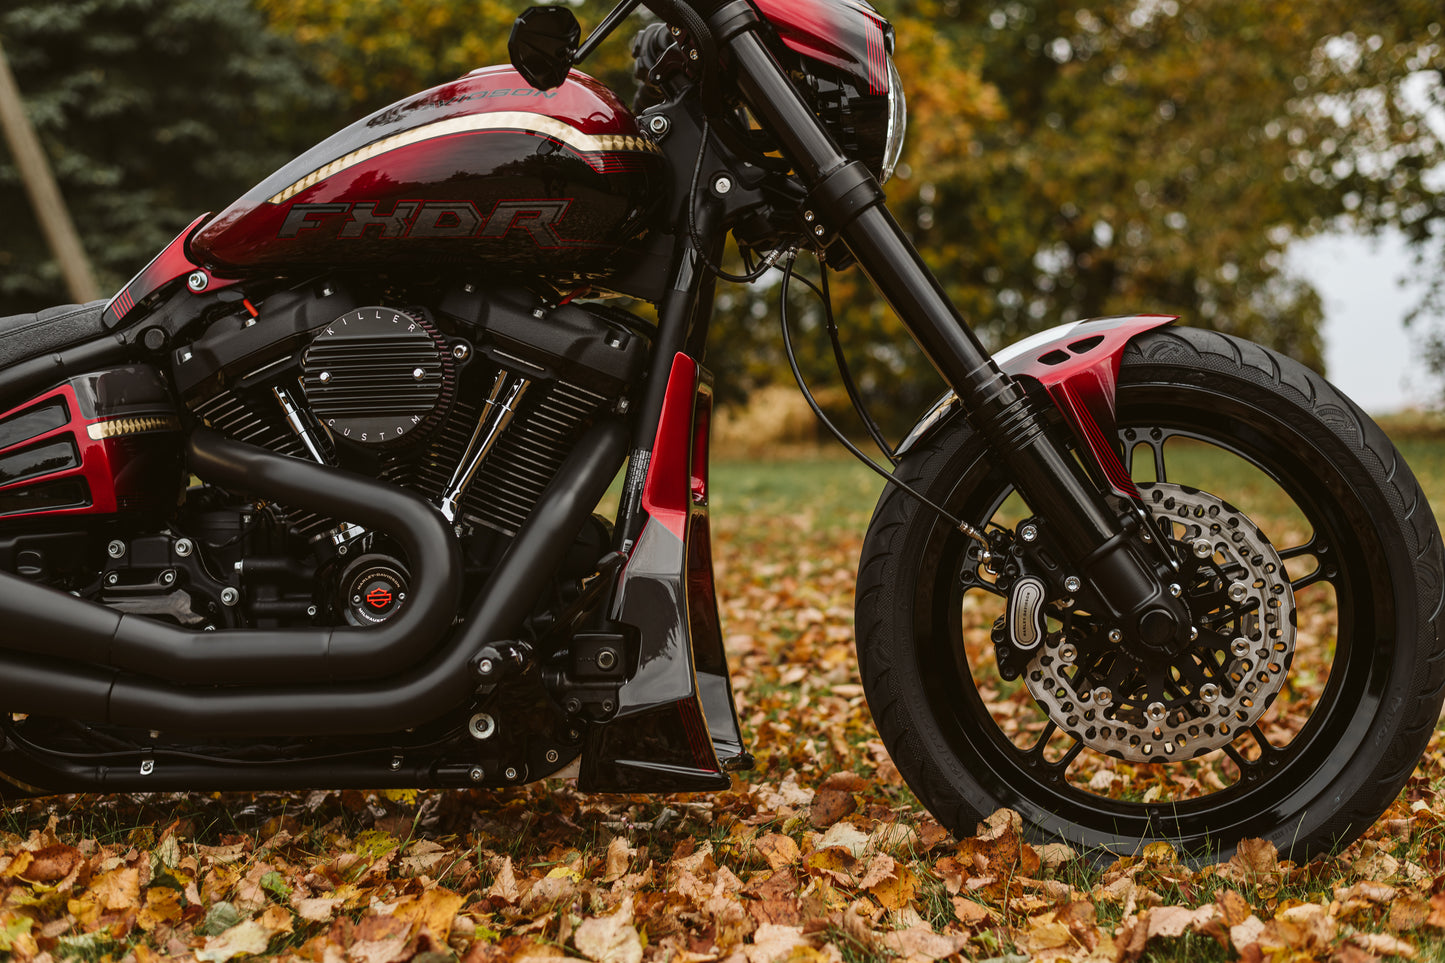 Zoomed Harley Davidson motorcycle with Killer Custom lower fork covers from the side outside with fallen leaves in the background